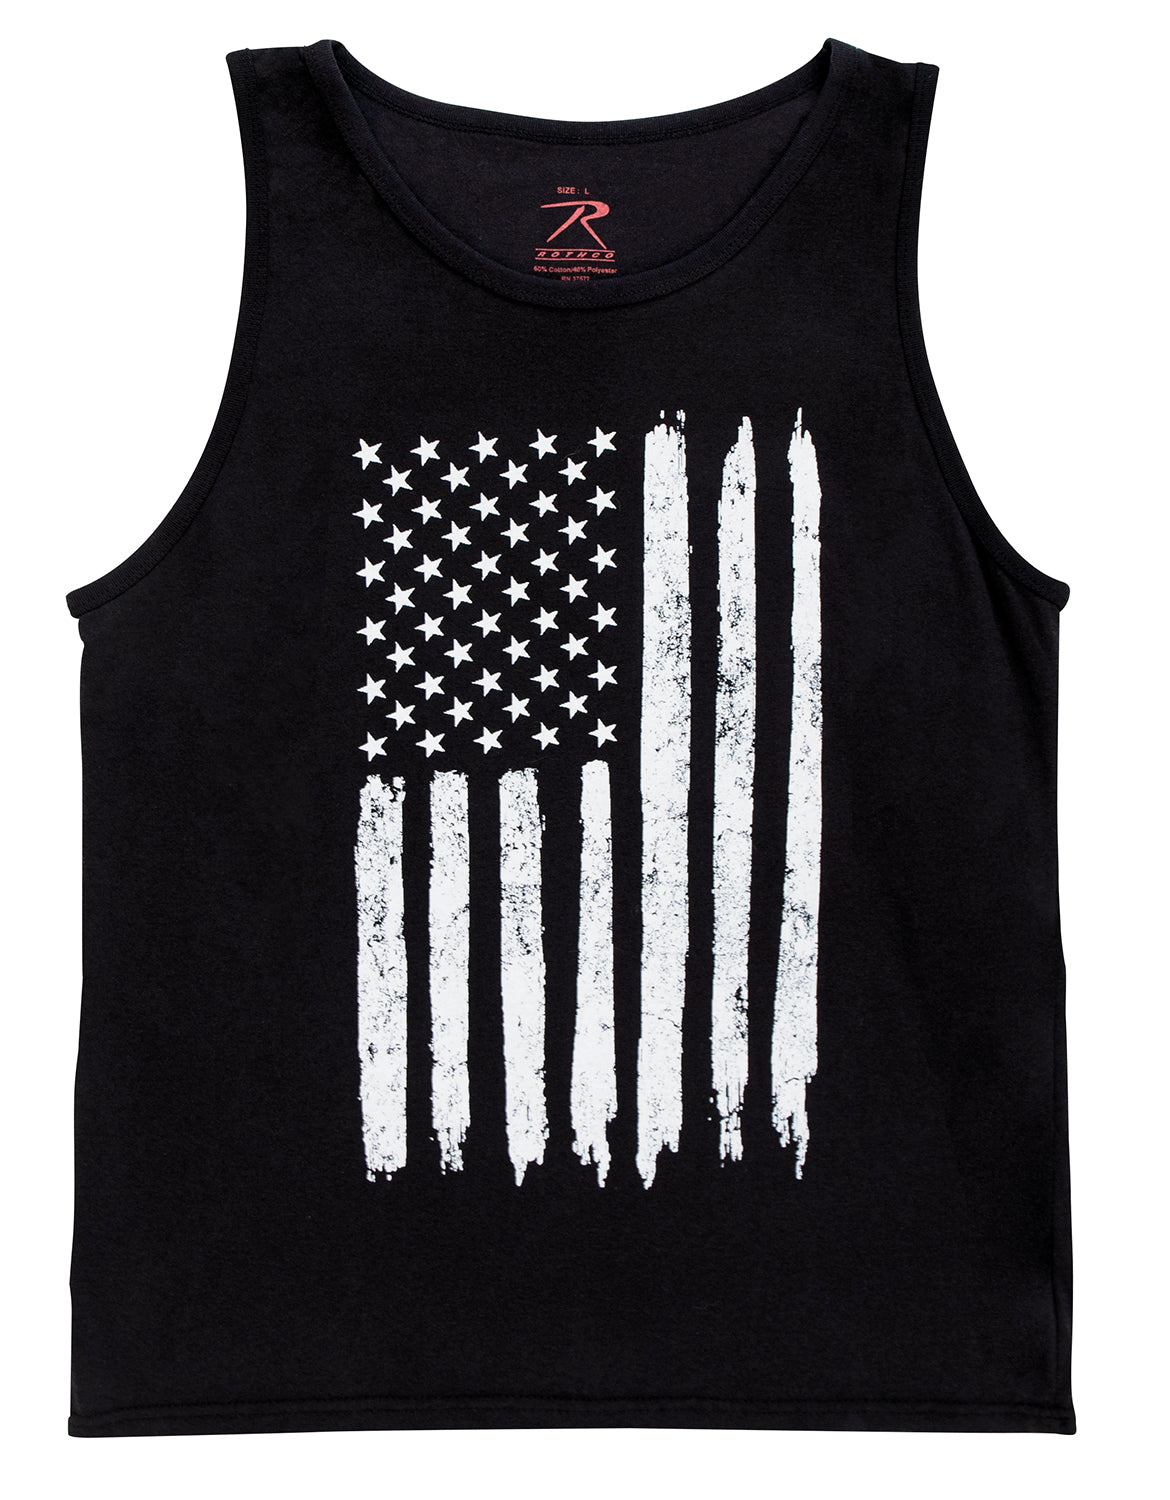 Rothco Men's Black Tank Top w/ Vertical Distressed US Flag